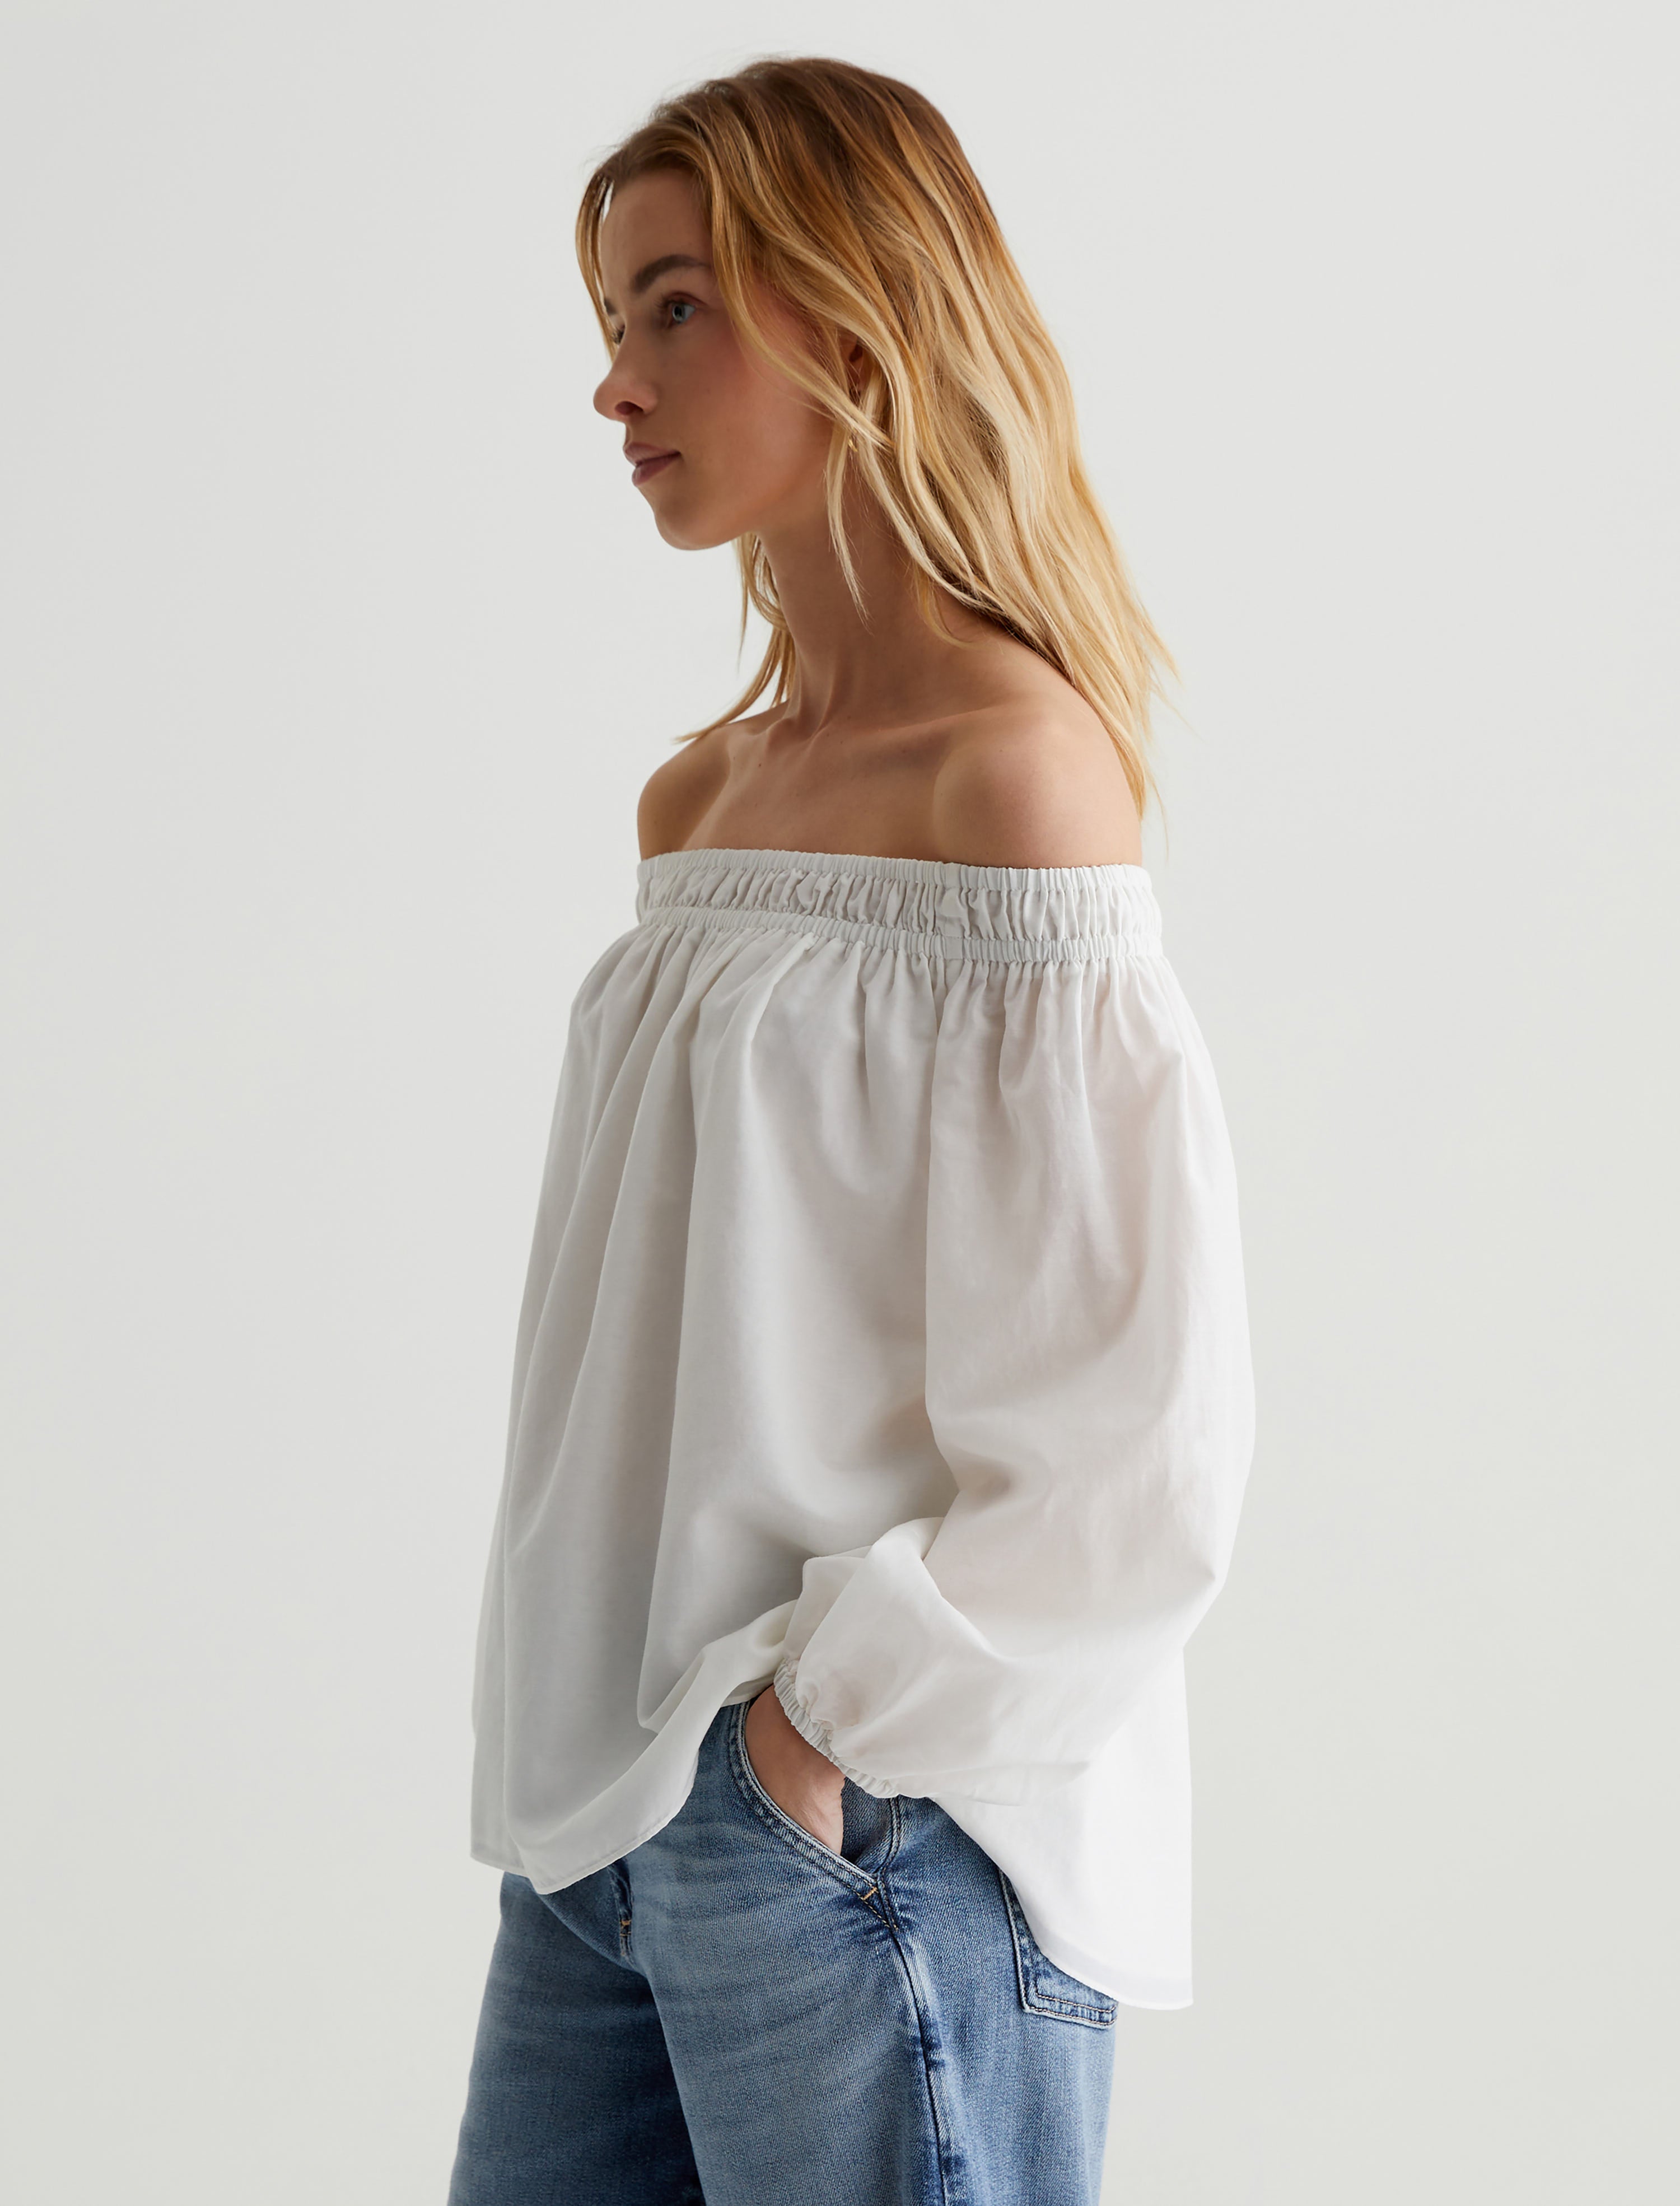 Ag Jeans Carroline Top In White